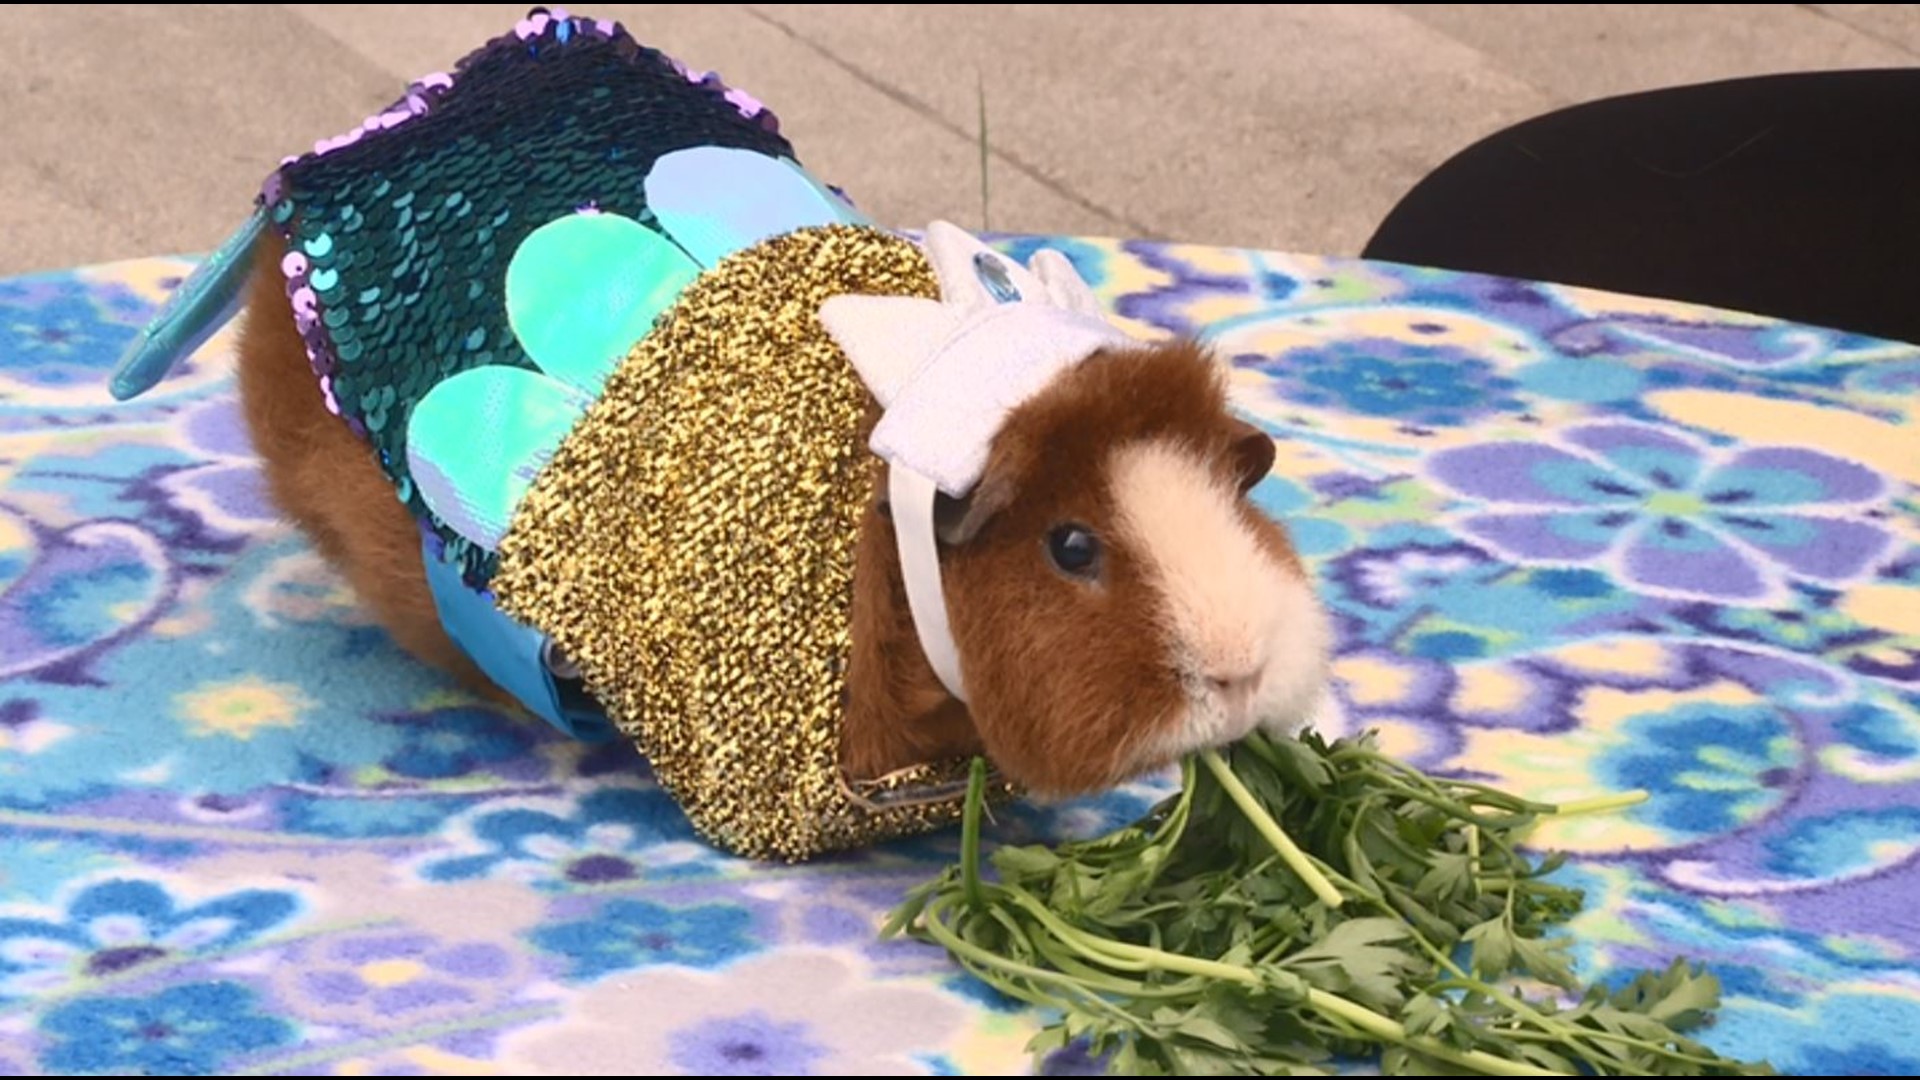 The classroom pets star in videos that help calm and comfort the kids.